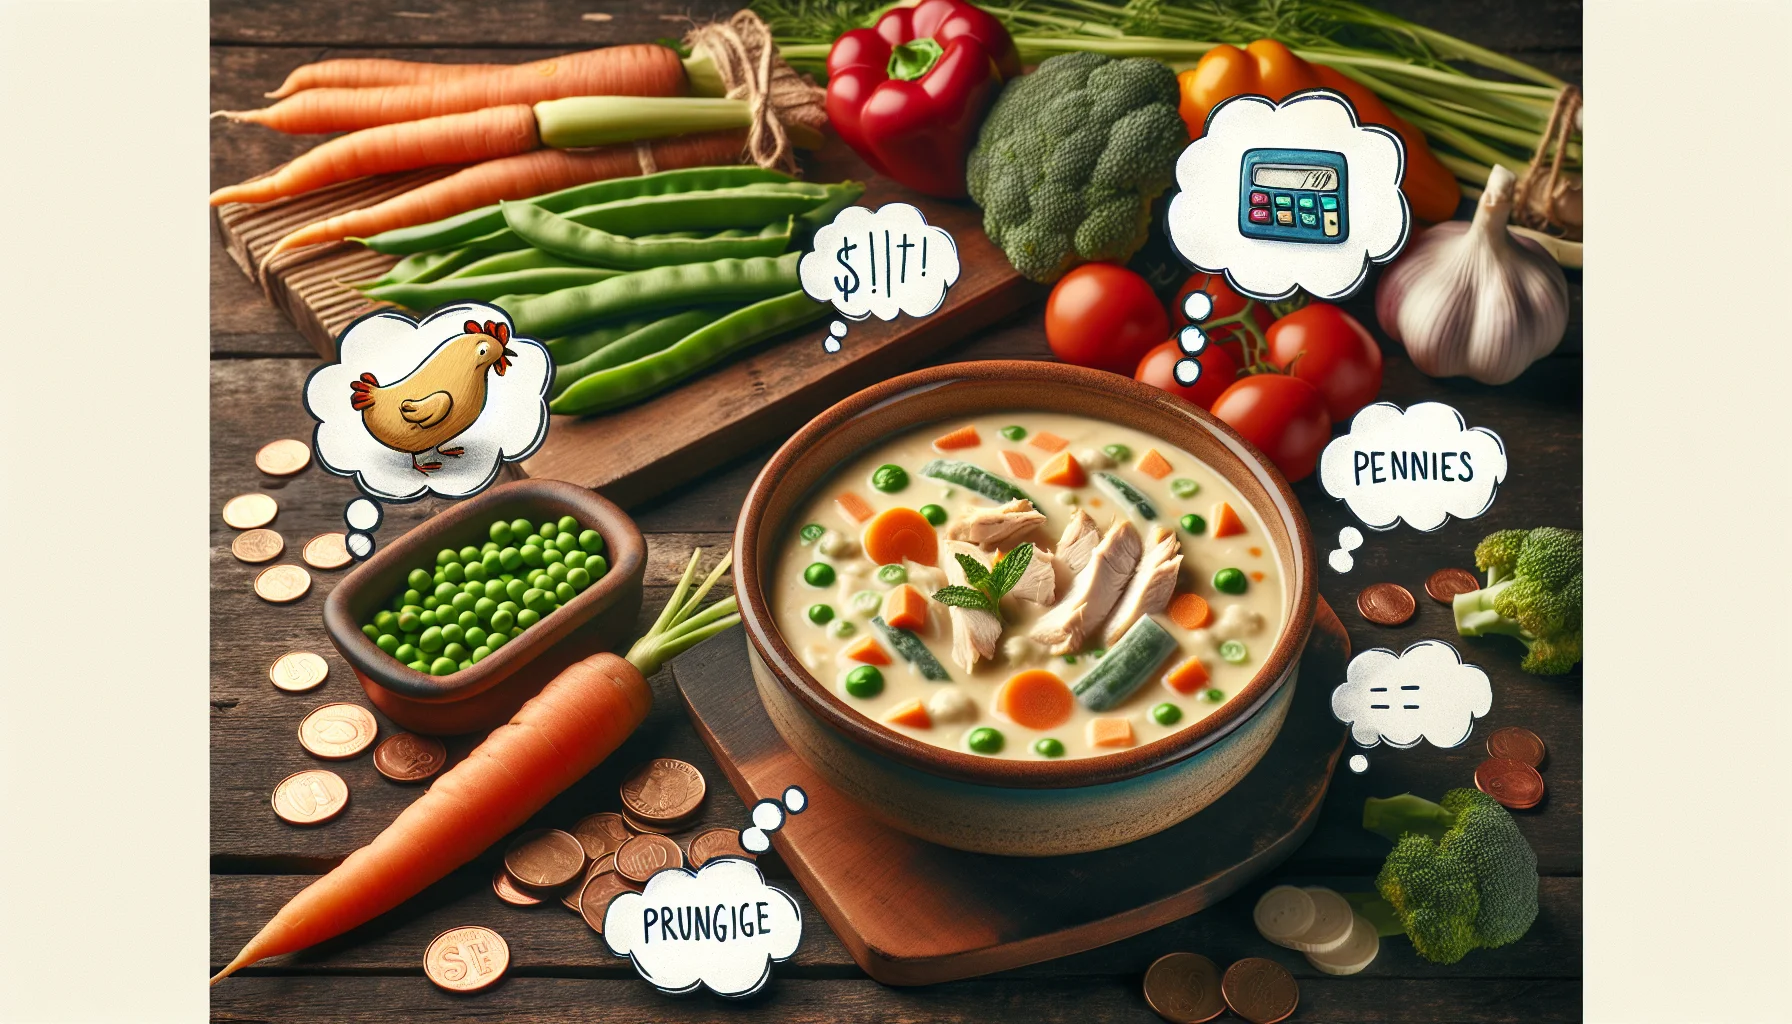 Create a realistic image of Creamy Chicken and Vegetable Chowder exuding a sense of humor. The soup is in a rustic stoneware bowl on a wooden table full of various colorful fresh vegetables like carrots, peas, and broccoli. Around the bowl, have small illustrated thought bubbles each showcasing different scenarios; one depicting the chicken stretching pennies, other showing vegetables performing a budget calculation, indicating the affordability of the meal. The whole setup should make the viewer feel enticed towards the idea of eating healthy without spending a fortune.